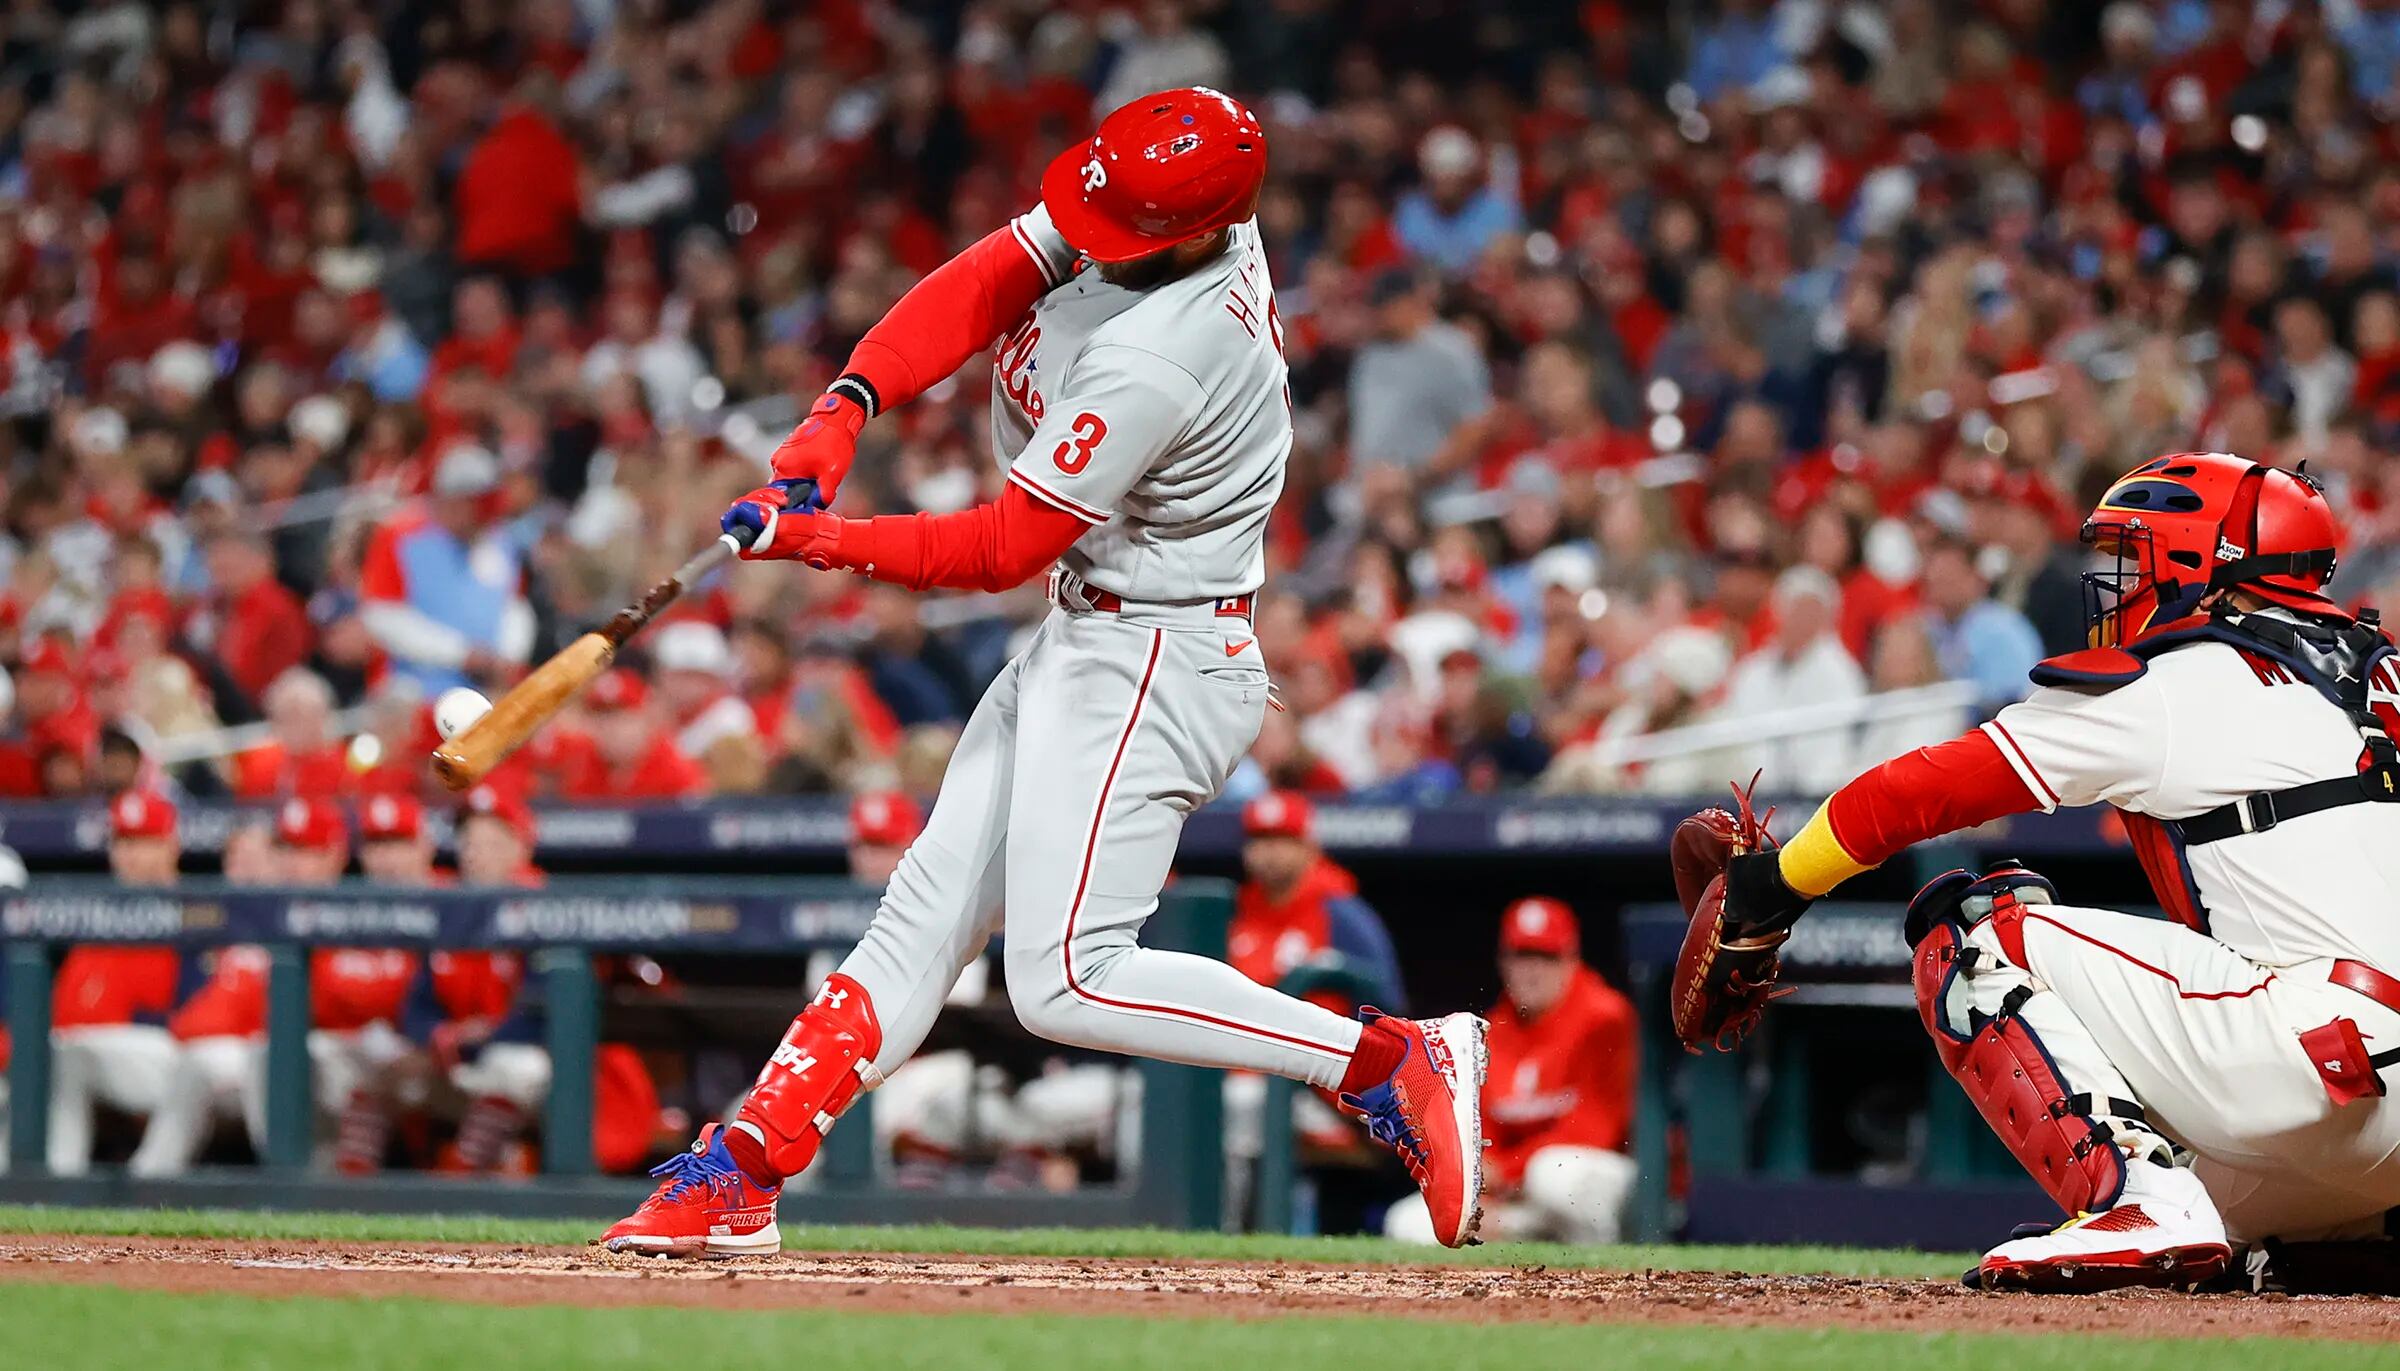 Magical era of Cardinals baseball ends with a whimper as Phillies